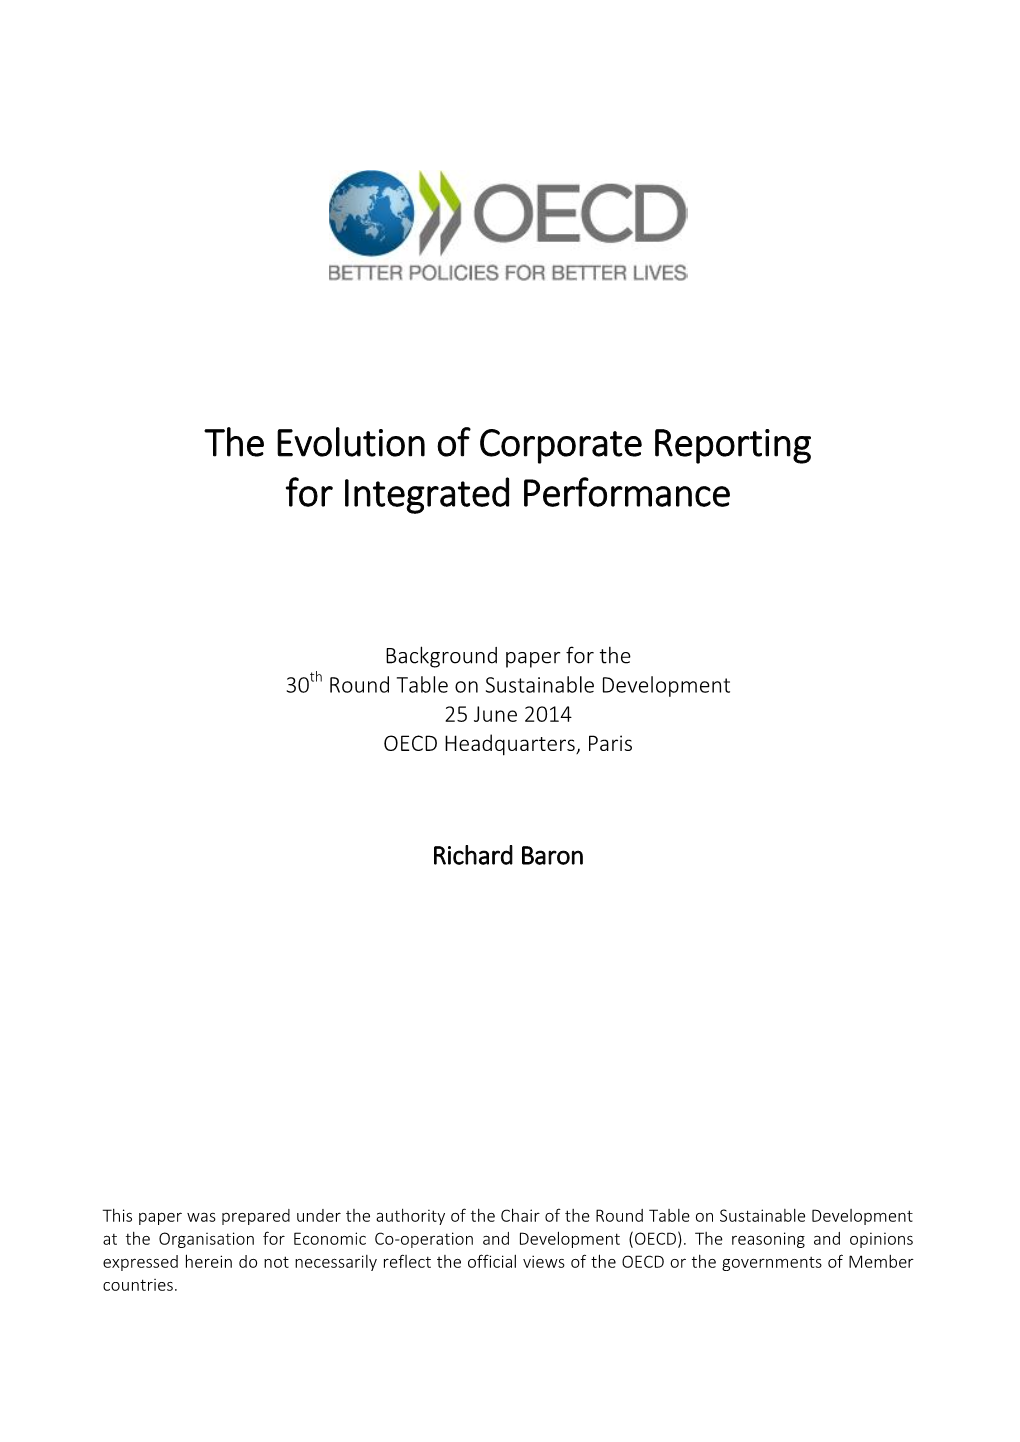 The Evolution of Corporate Reporting for Integrated Performance